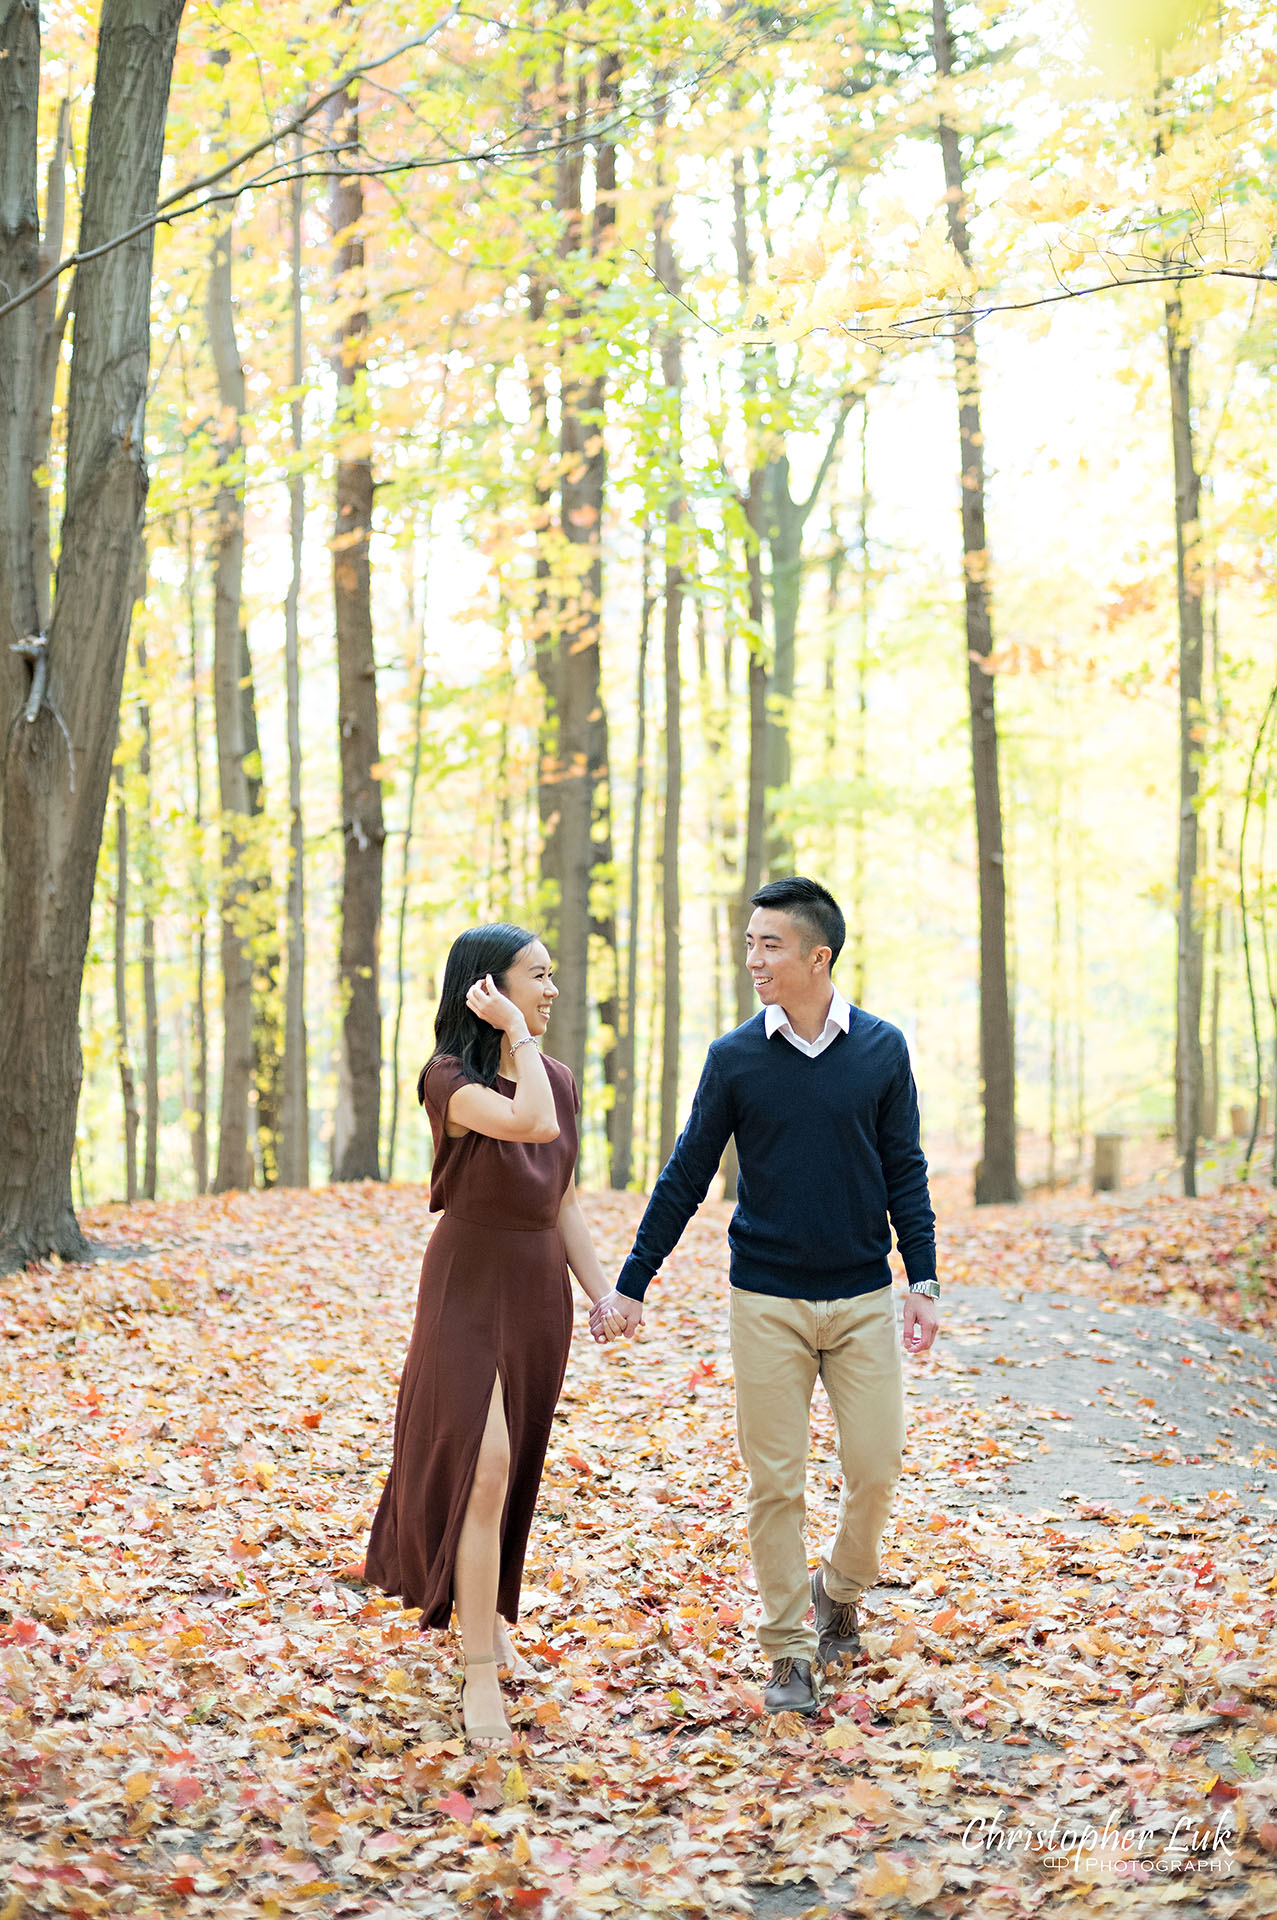 Christopher Luk Toronto Wedding Engagement Session Photographer Autumn Fall Leaves Natural Candid Photojournalistic Bride Groom Hiking Trail Trees Smiling Each Other Happy Walking Holding Hands Together 